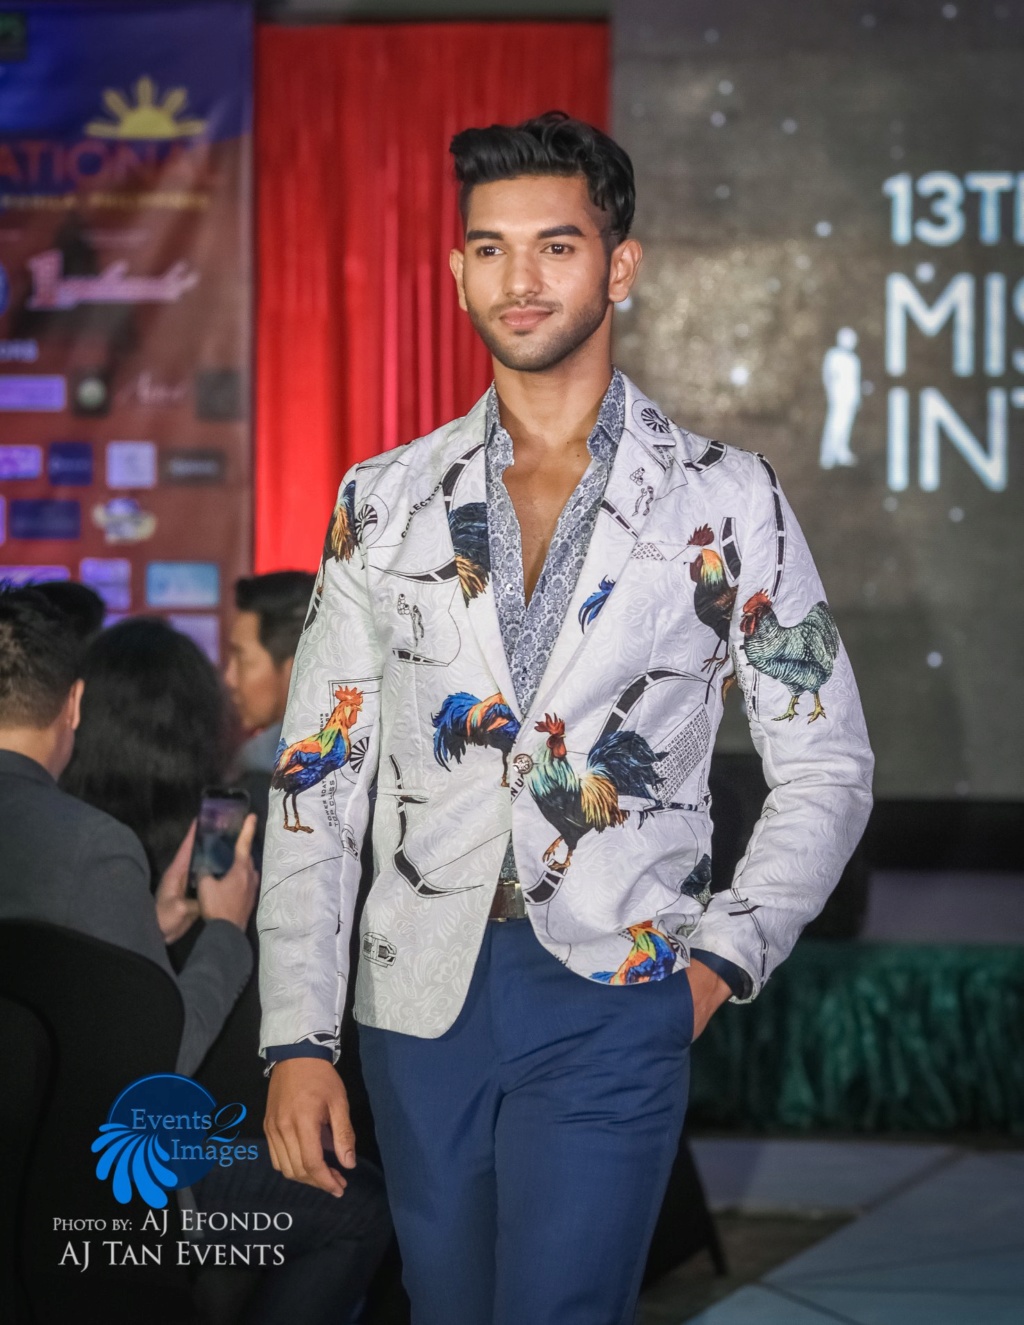 The 13th Mister International in Manila, Philippines on February 24,2019 - Page 10 52300310